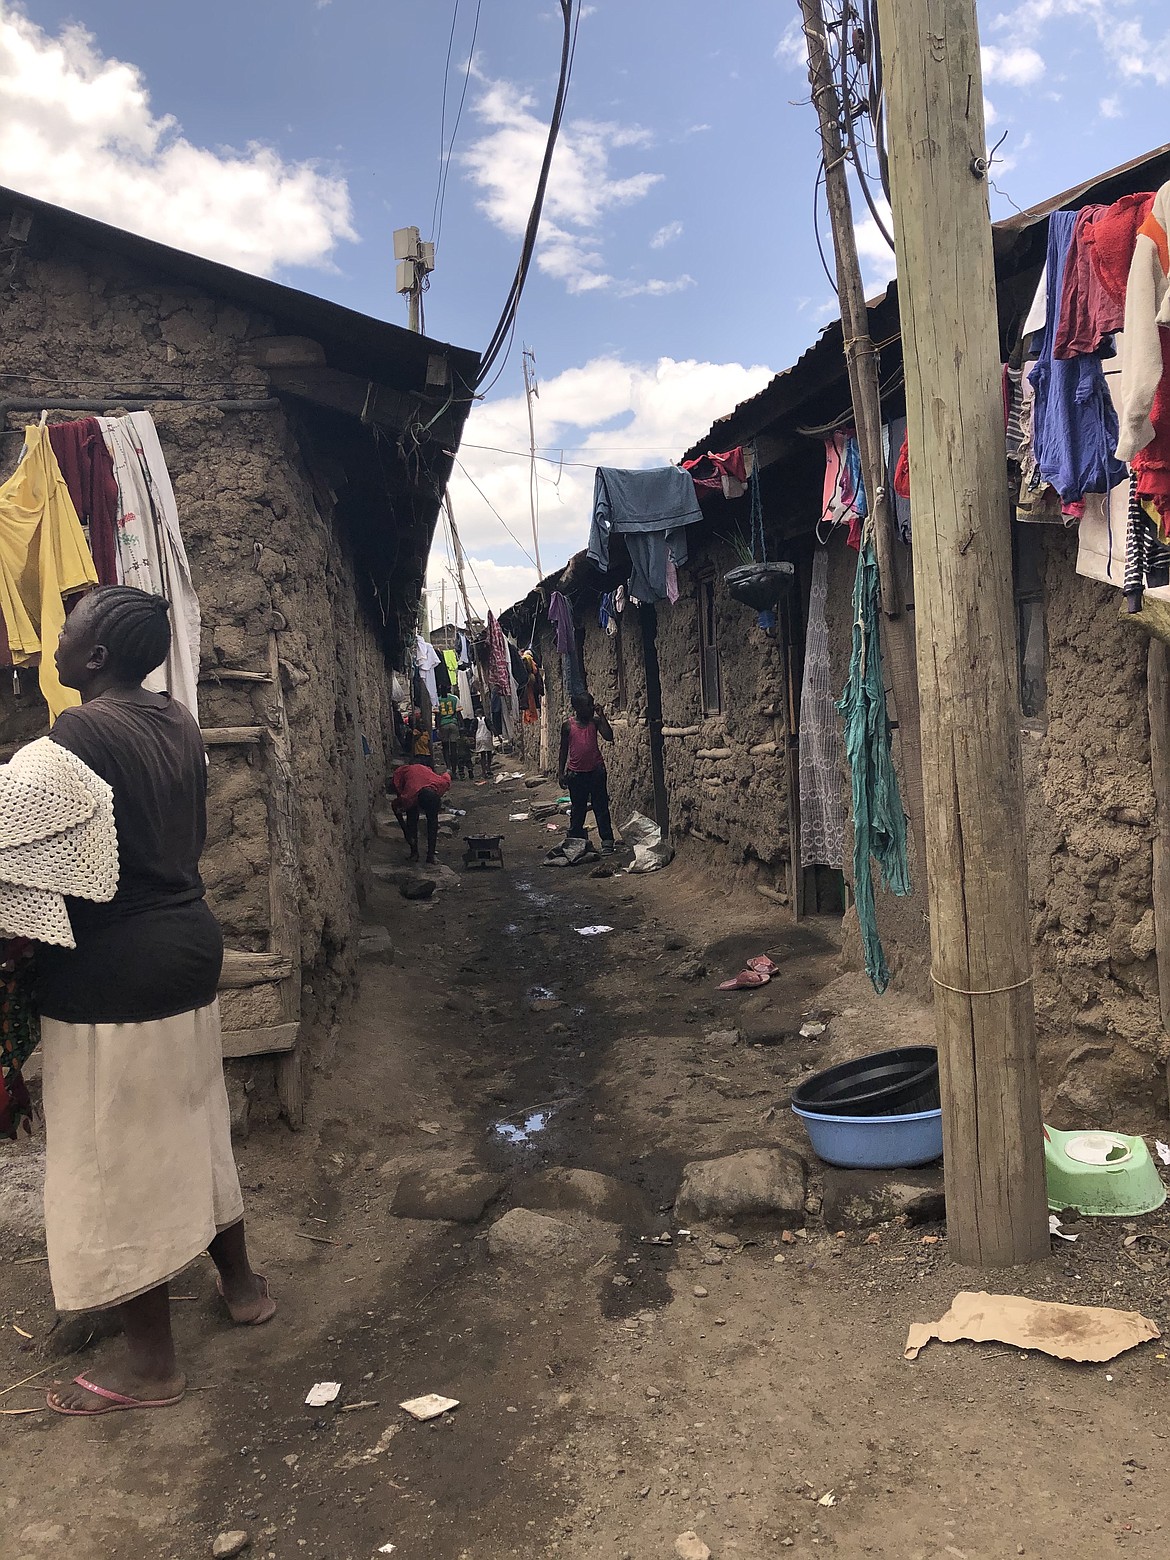 A family home in Rhonda slum within Nakuru County. Start Small staff does home visits month. This is how most of their children and their families live.